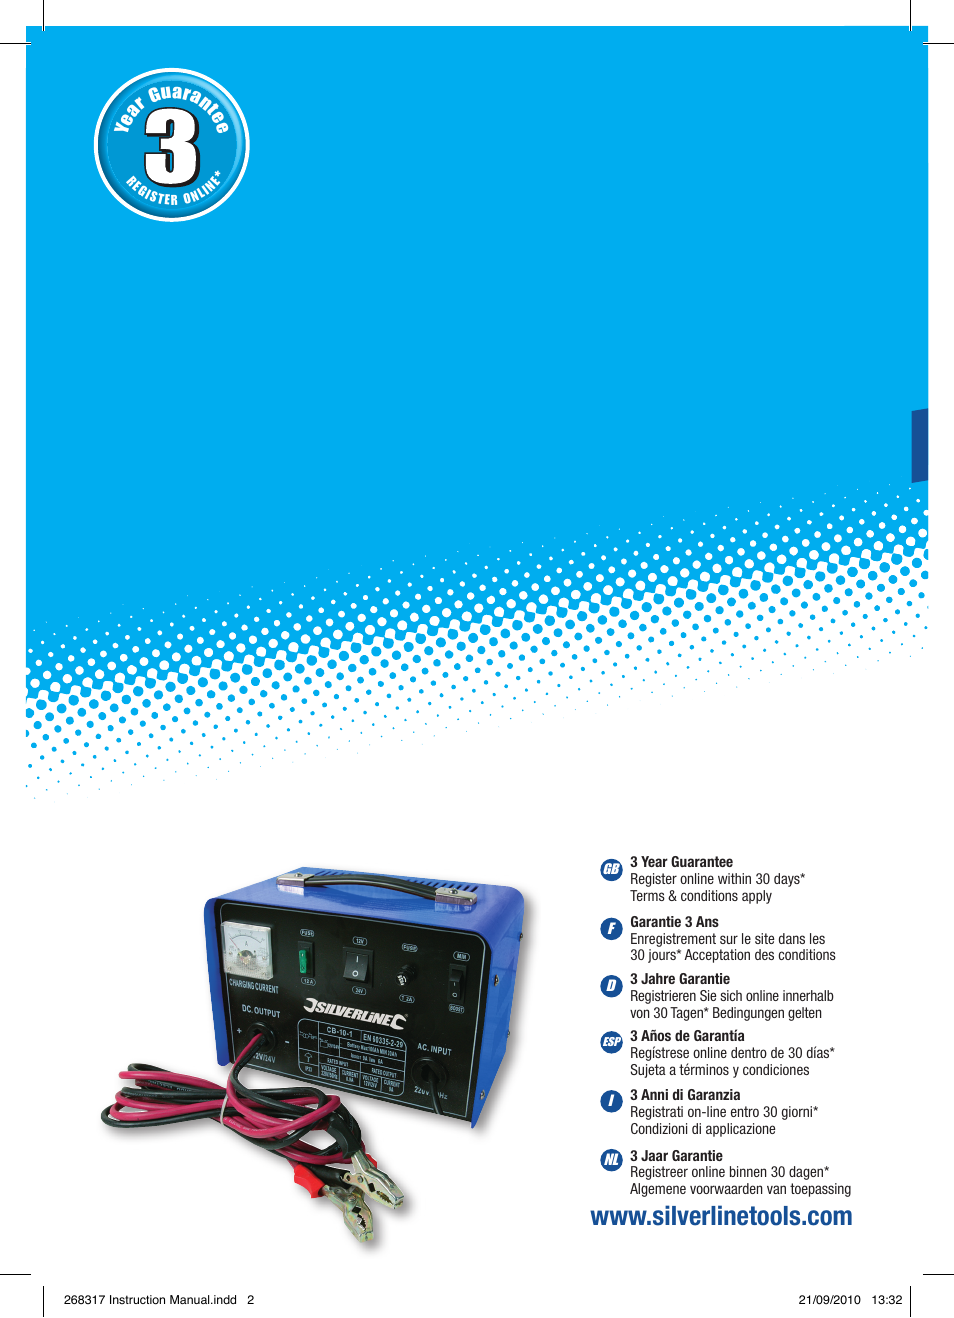 Silverline Battery Charger 12/24V User Manual | 28 pages